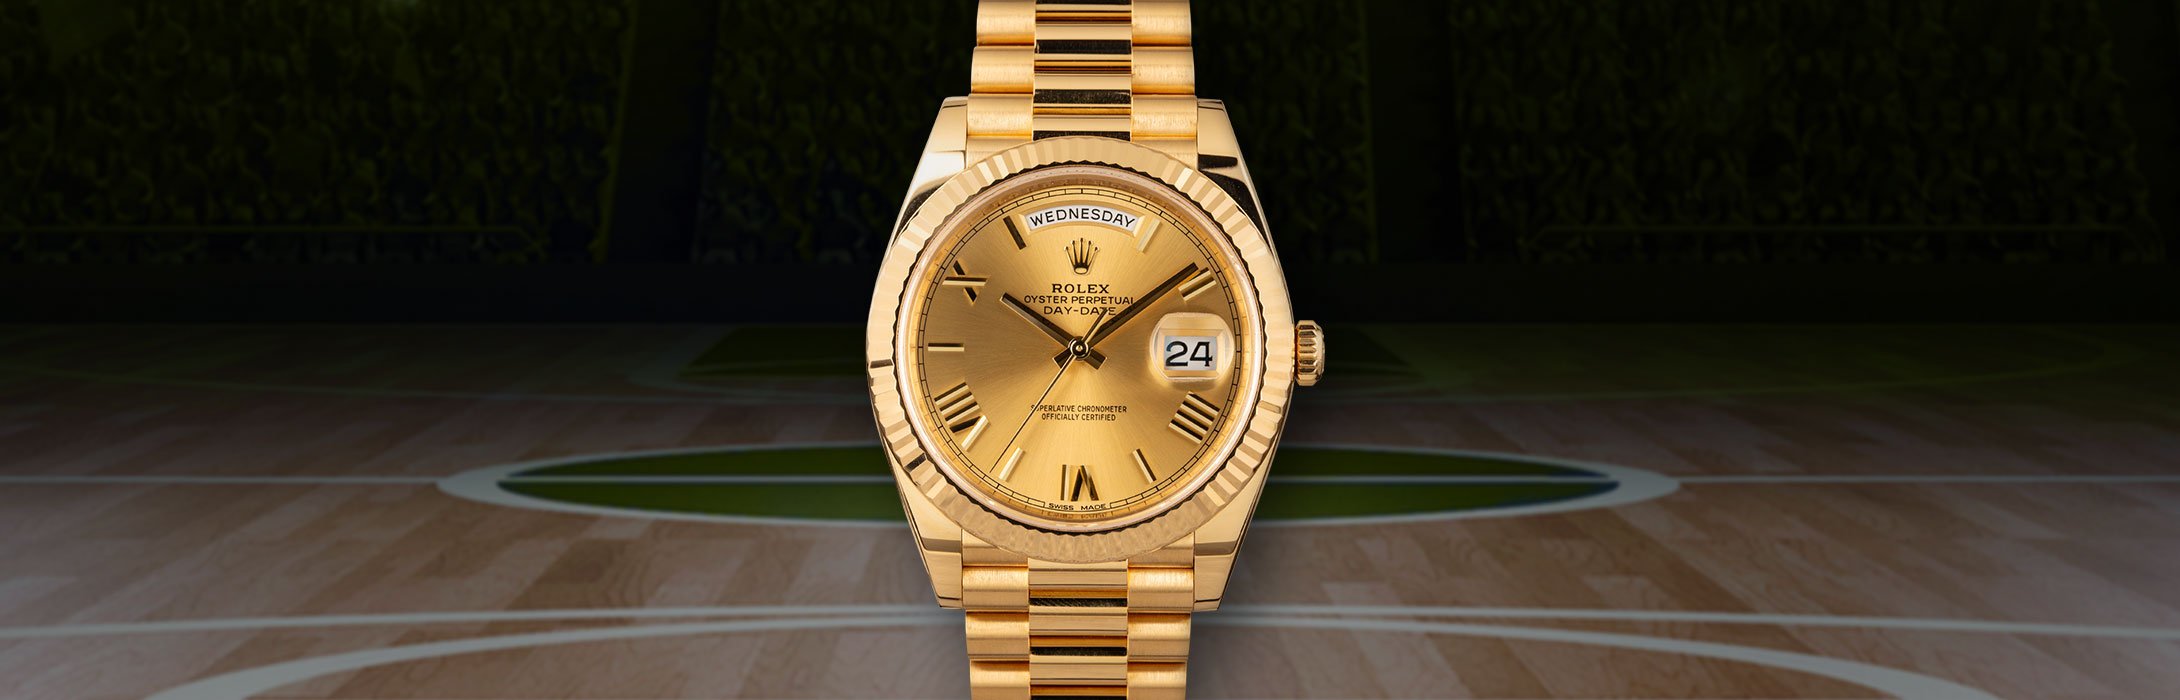 Luxury Watches Worn by Top NBA Players 